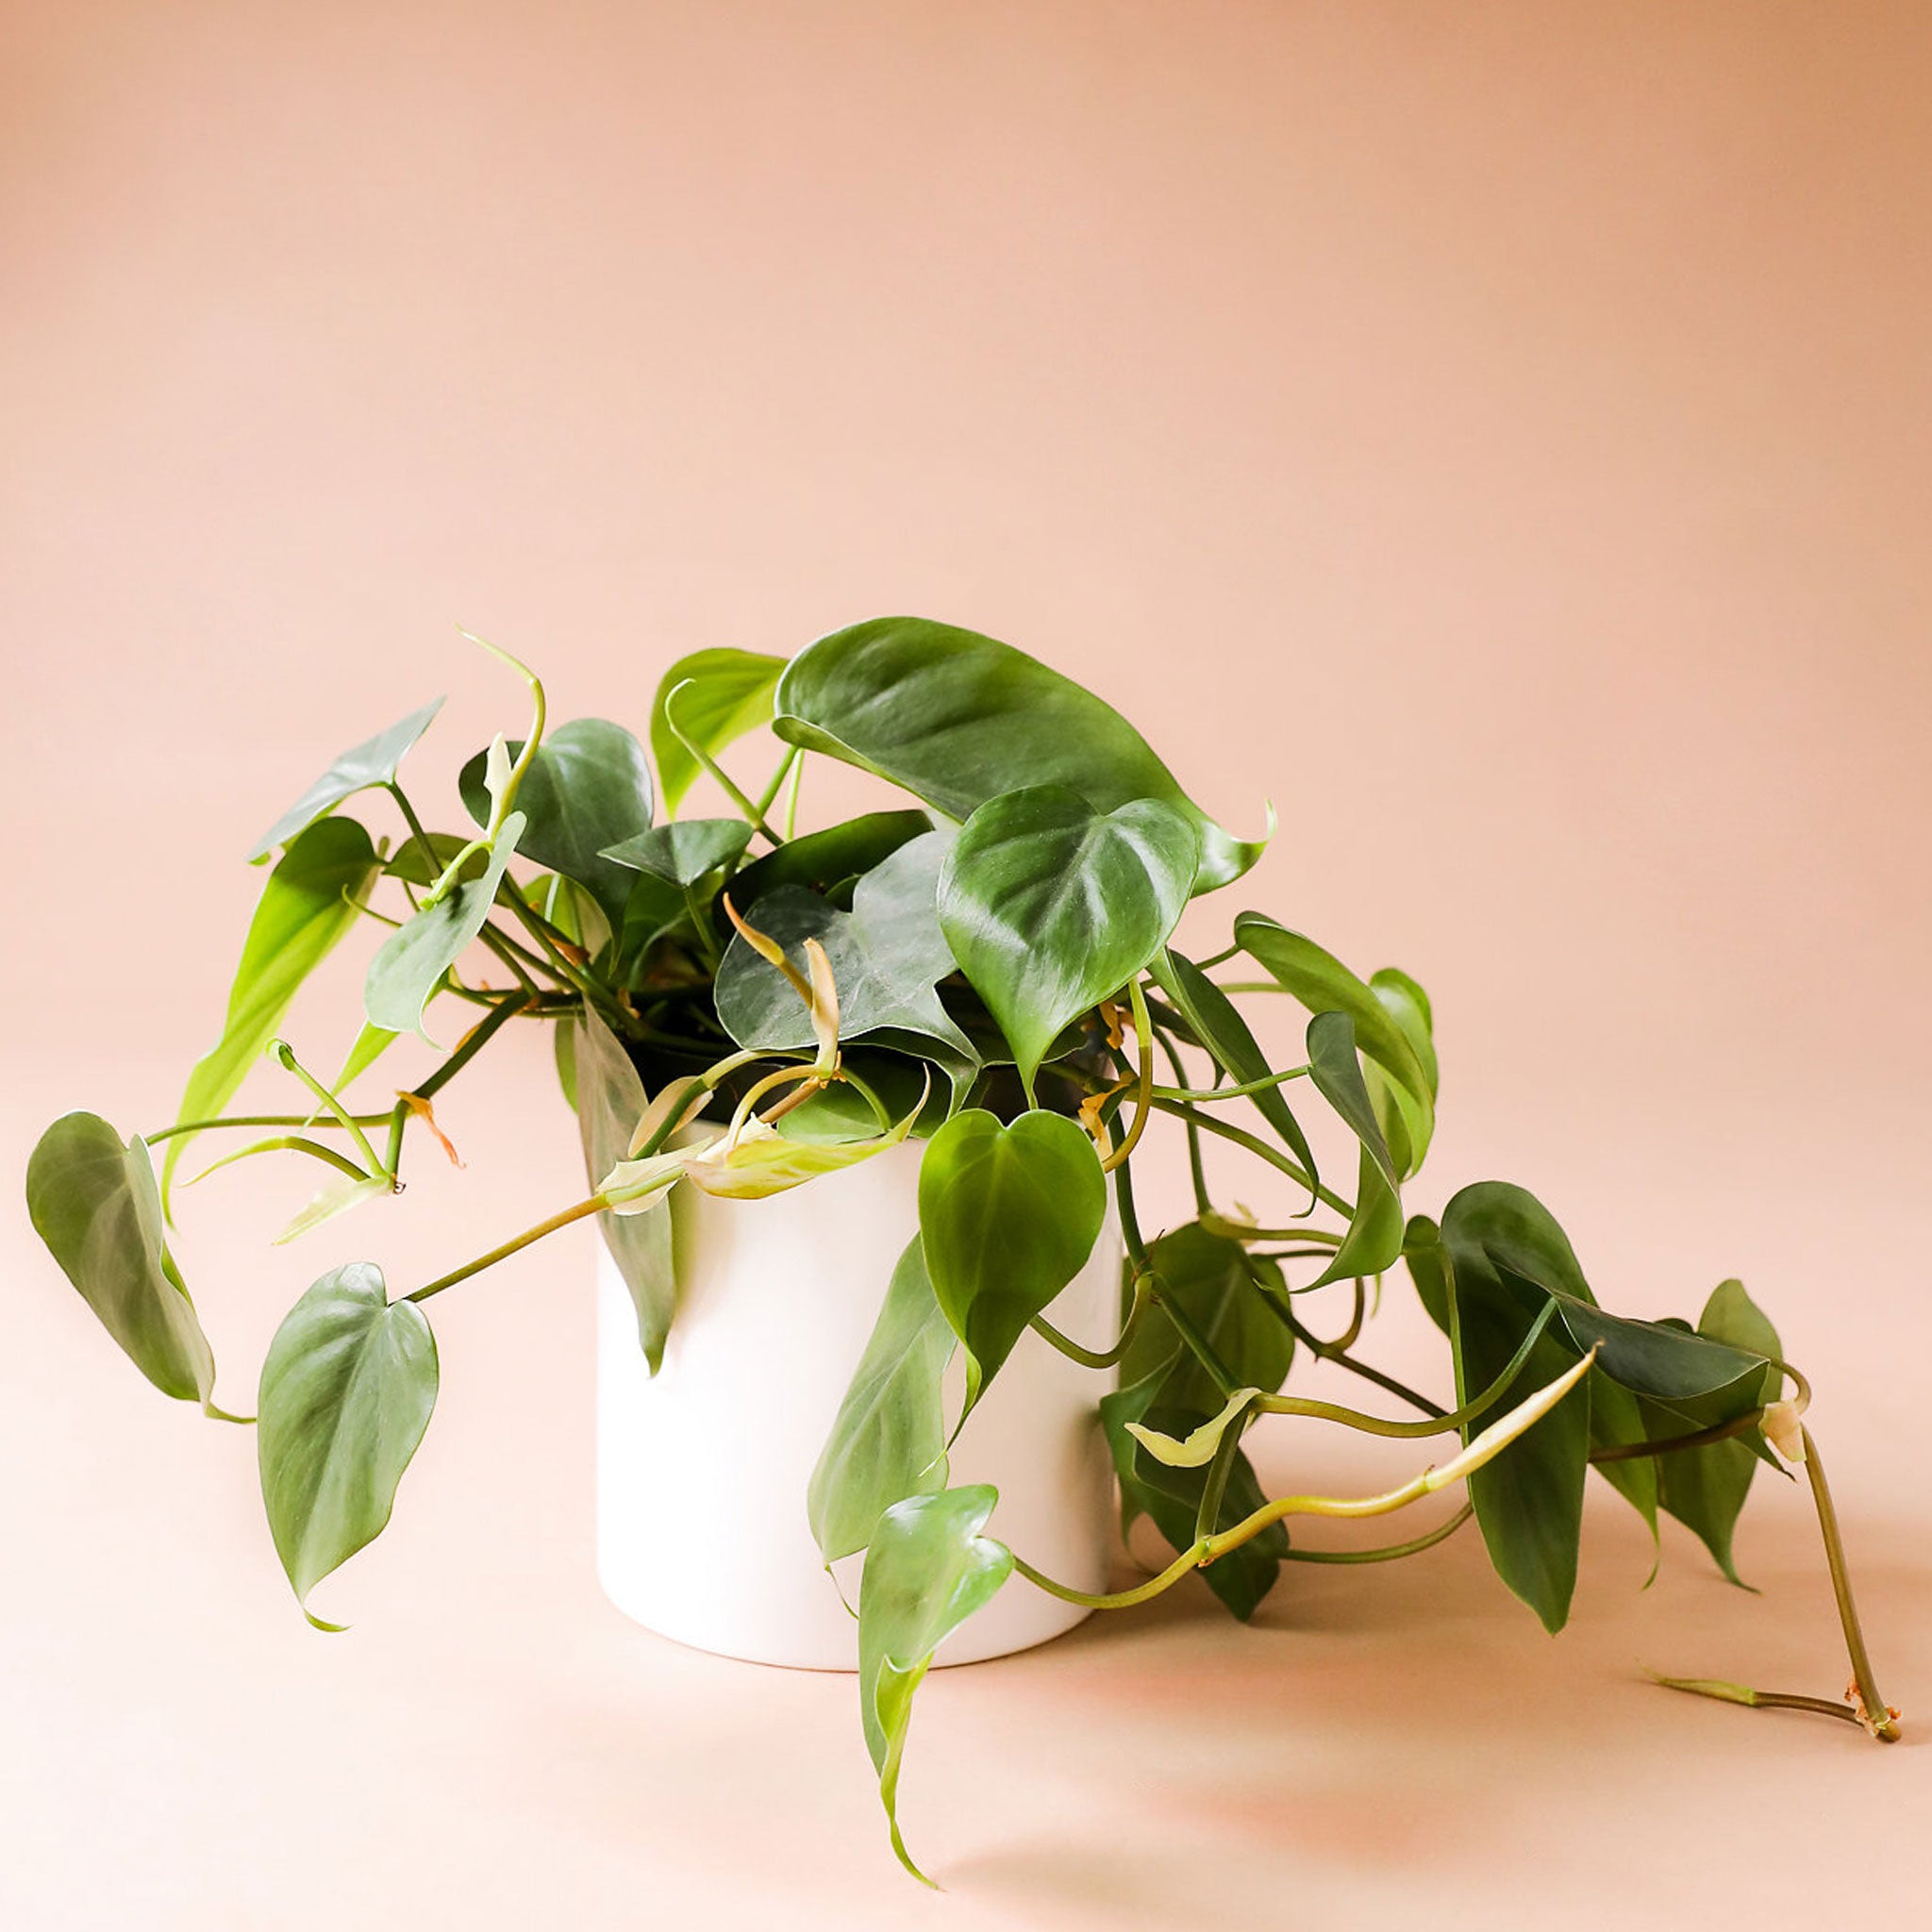 on a peach ground is a white circular pot. Inside the pot is a philodendron codatum. The green leaves are wide with a pointed top. This plant has long green vines that spill over the side of the pot.